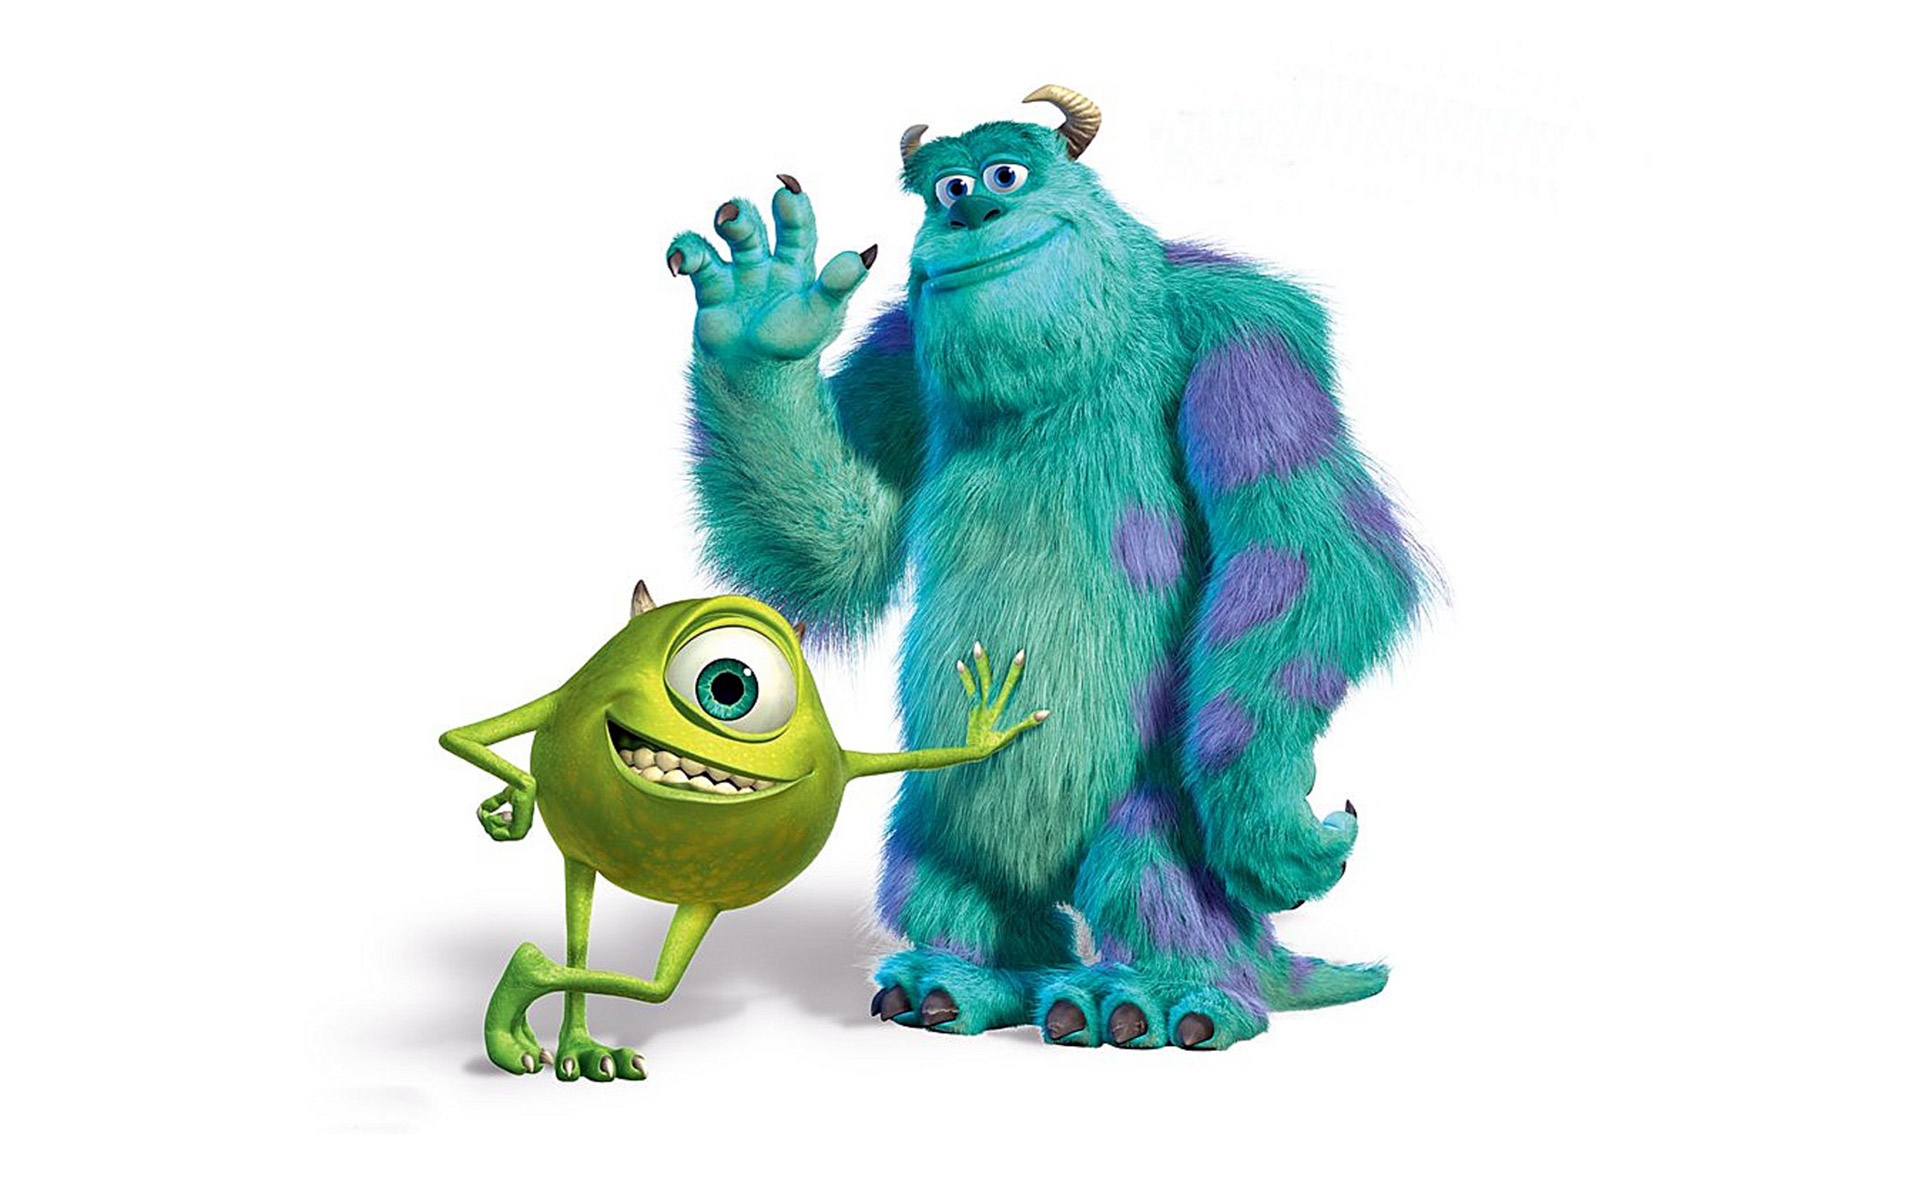 Movie News: Monsters University director reveals story in video